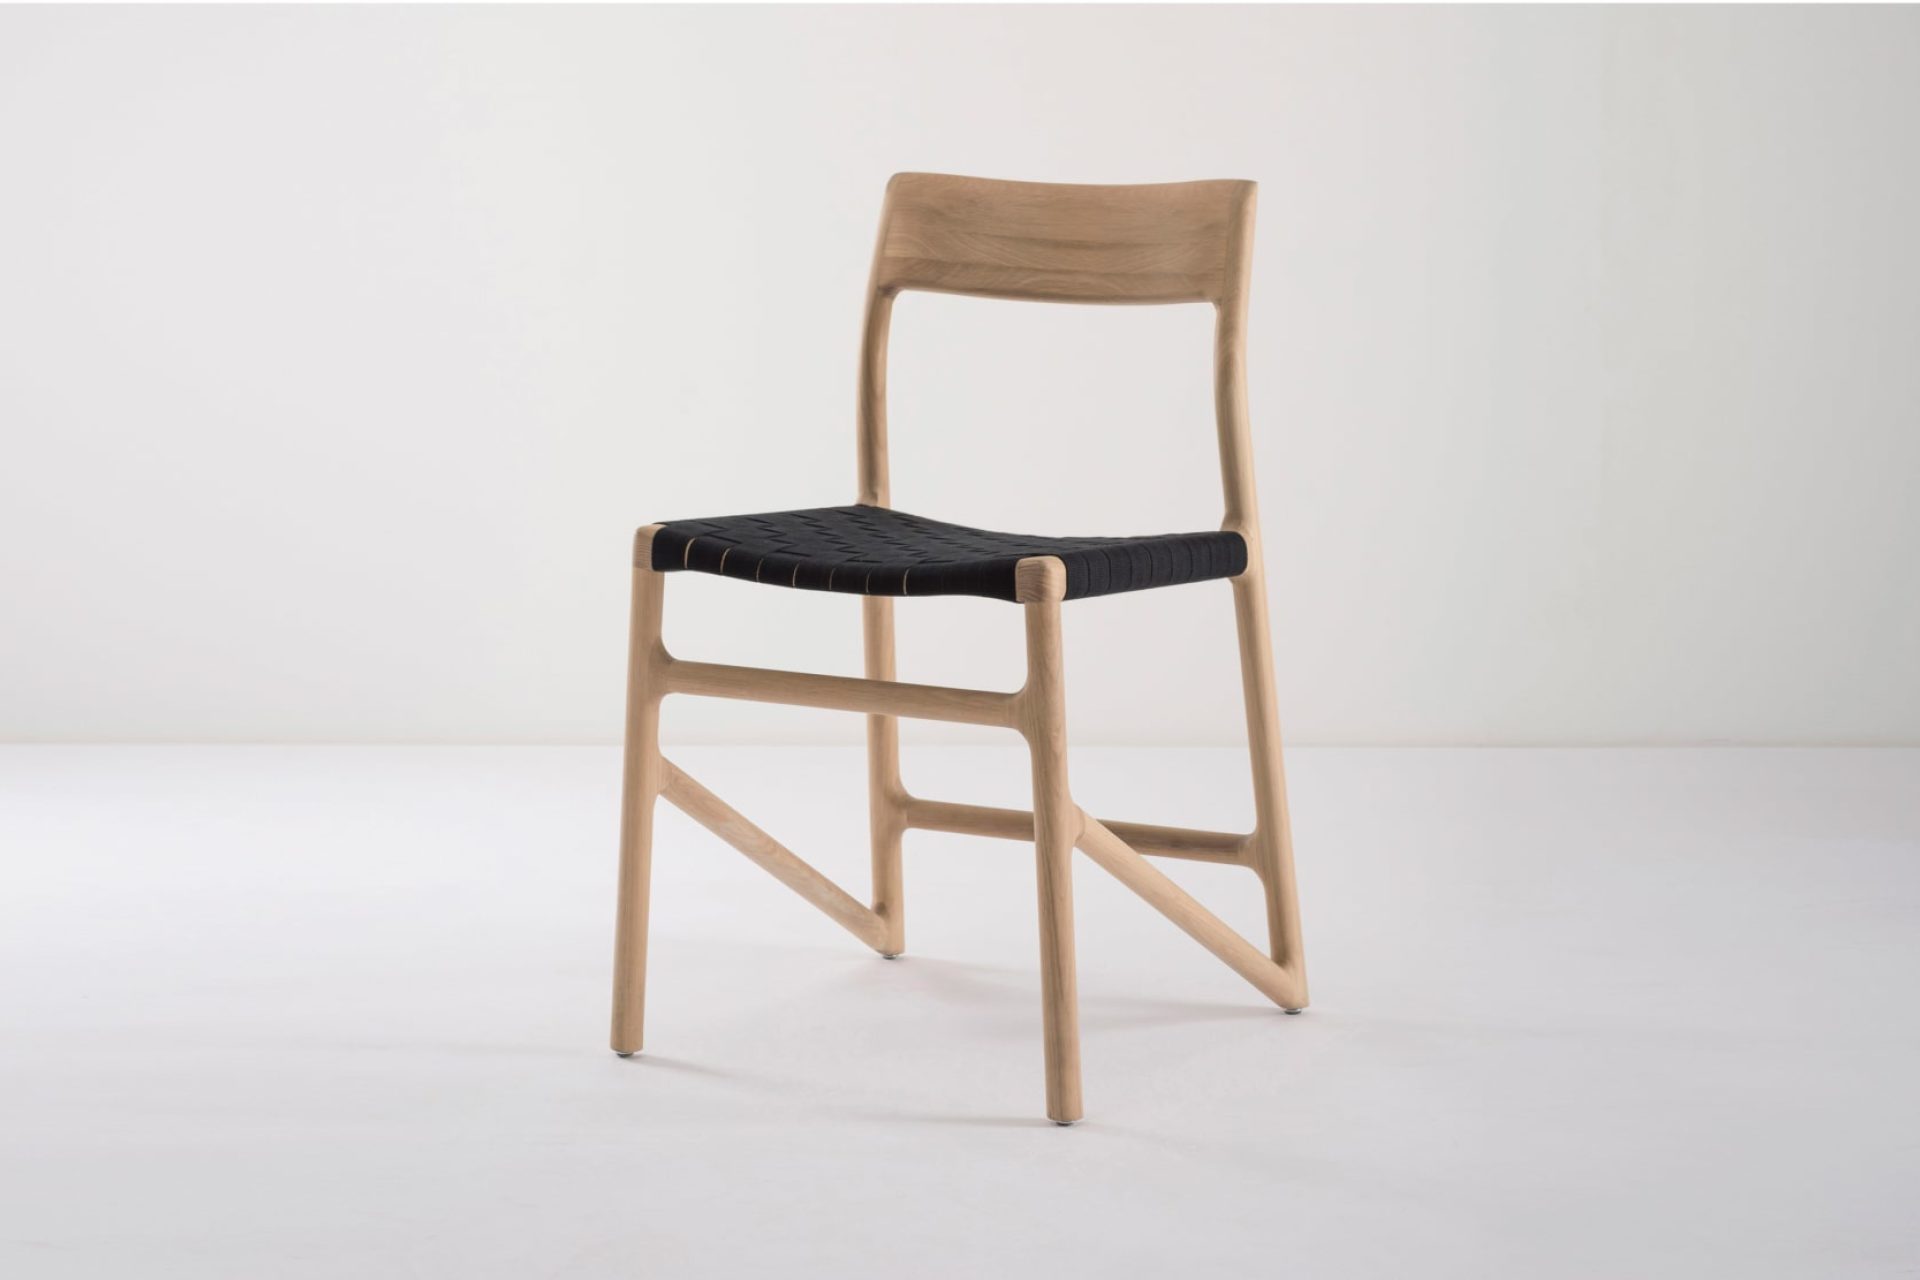 Chair with solid wood legs and backrest and a black cotton seat